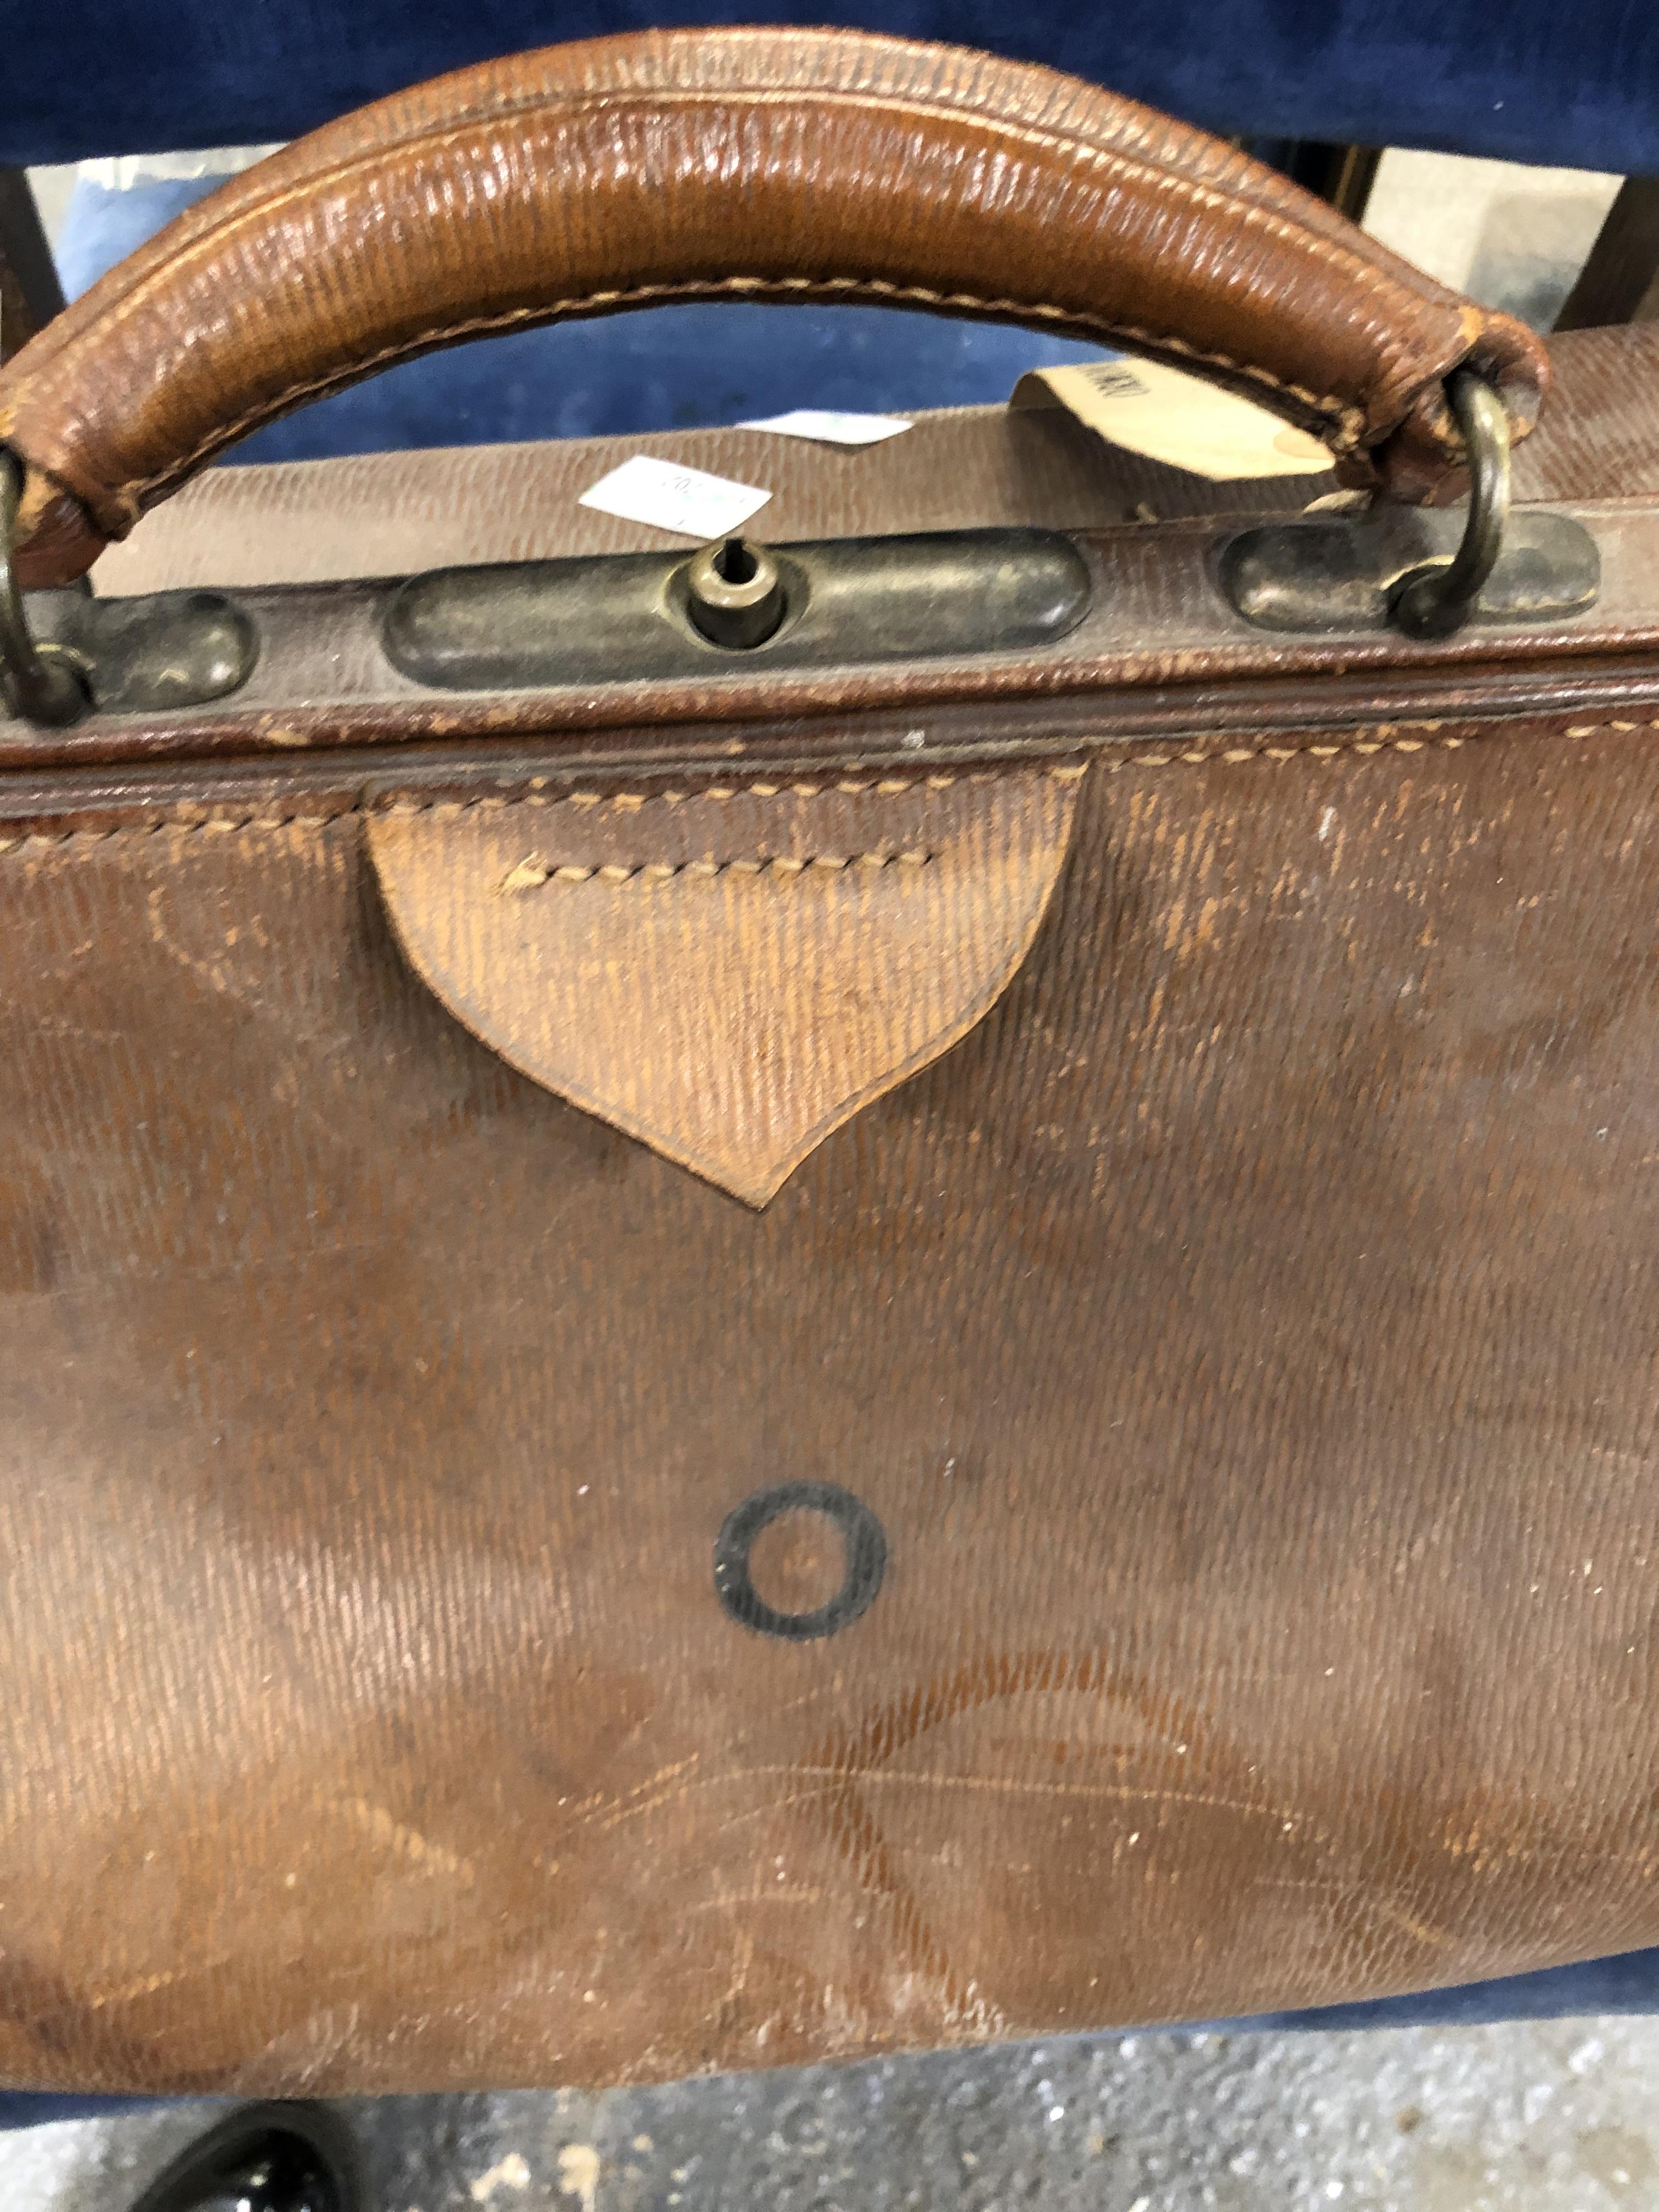 A PEAL & CO LEATHER GLADSTONE BAG, A LEATHER SUITCASE, THE LID. 43 x 35cms. TOGETHER WITH A BLACK - Image 7 of 19